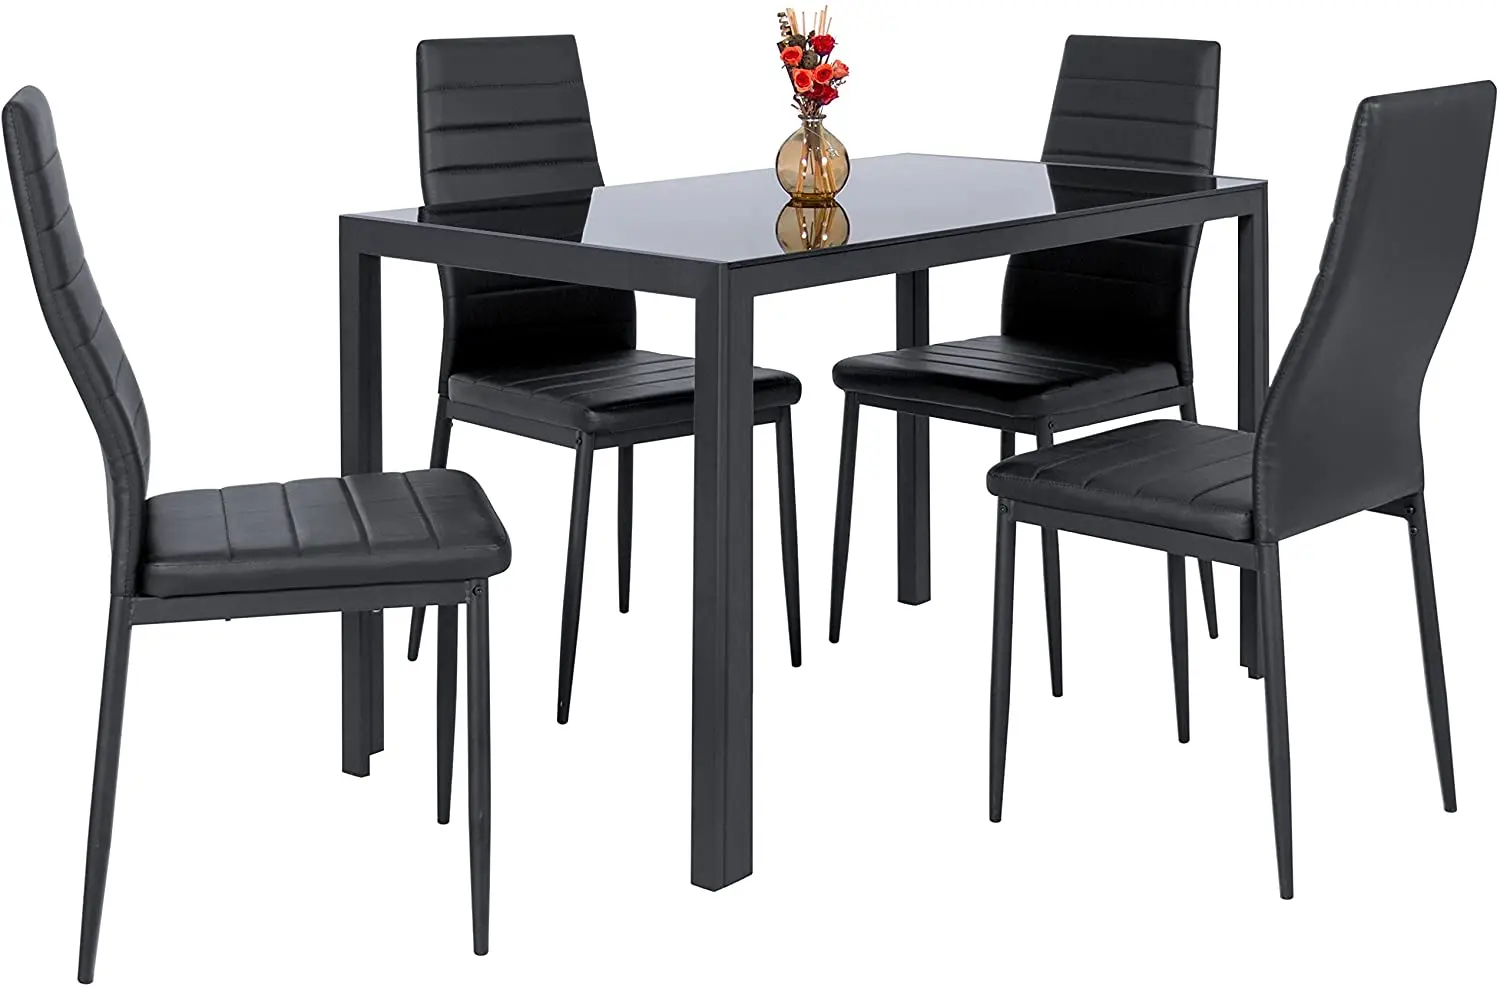 Modern Glass Dining Table Set 6 Chairs With Rectangular Top Metal Base